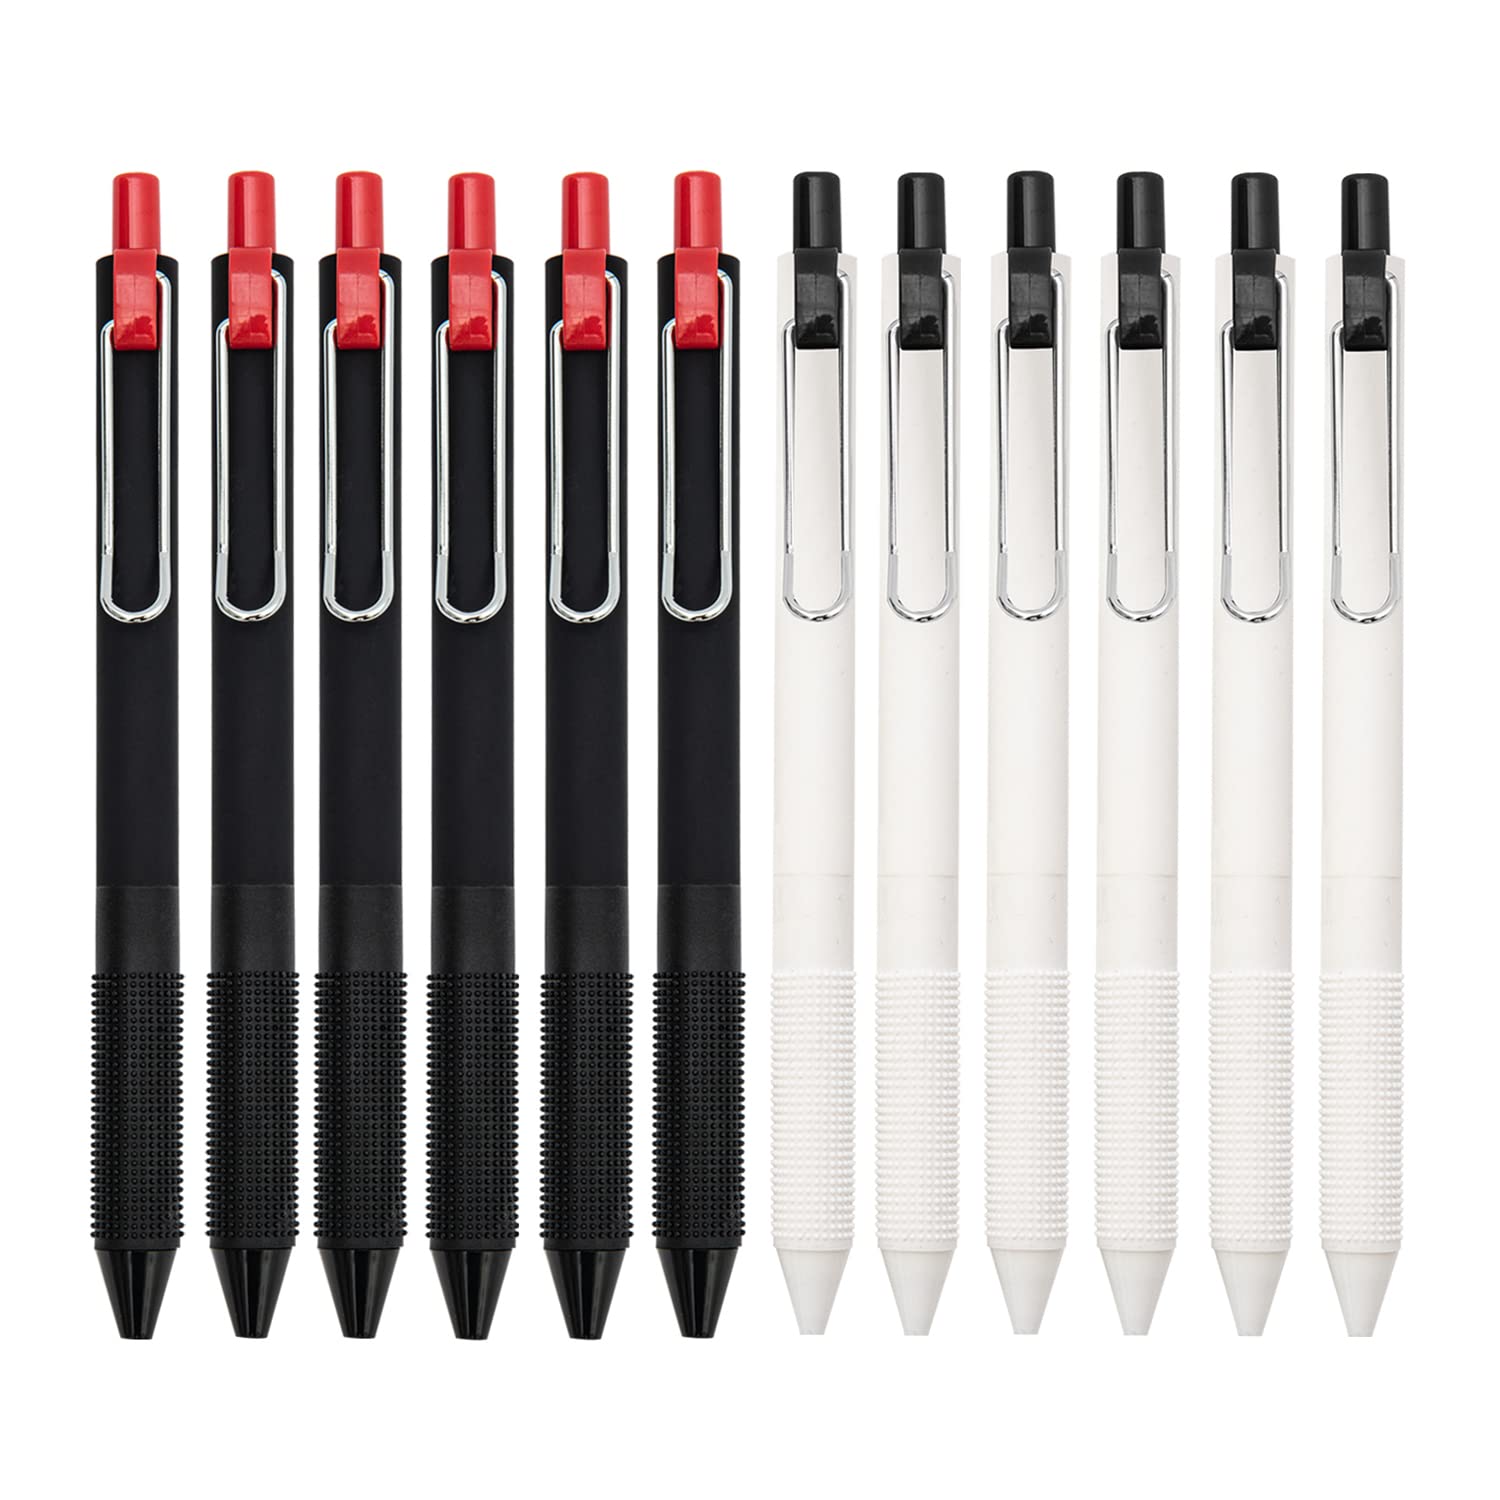 Sipa 8 pieces Ultra Fine Black Ink Pens for Drawing, Illustration